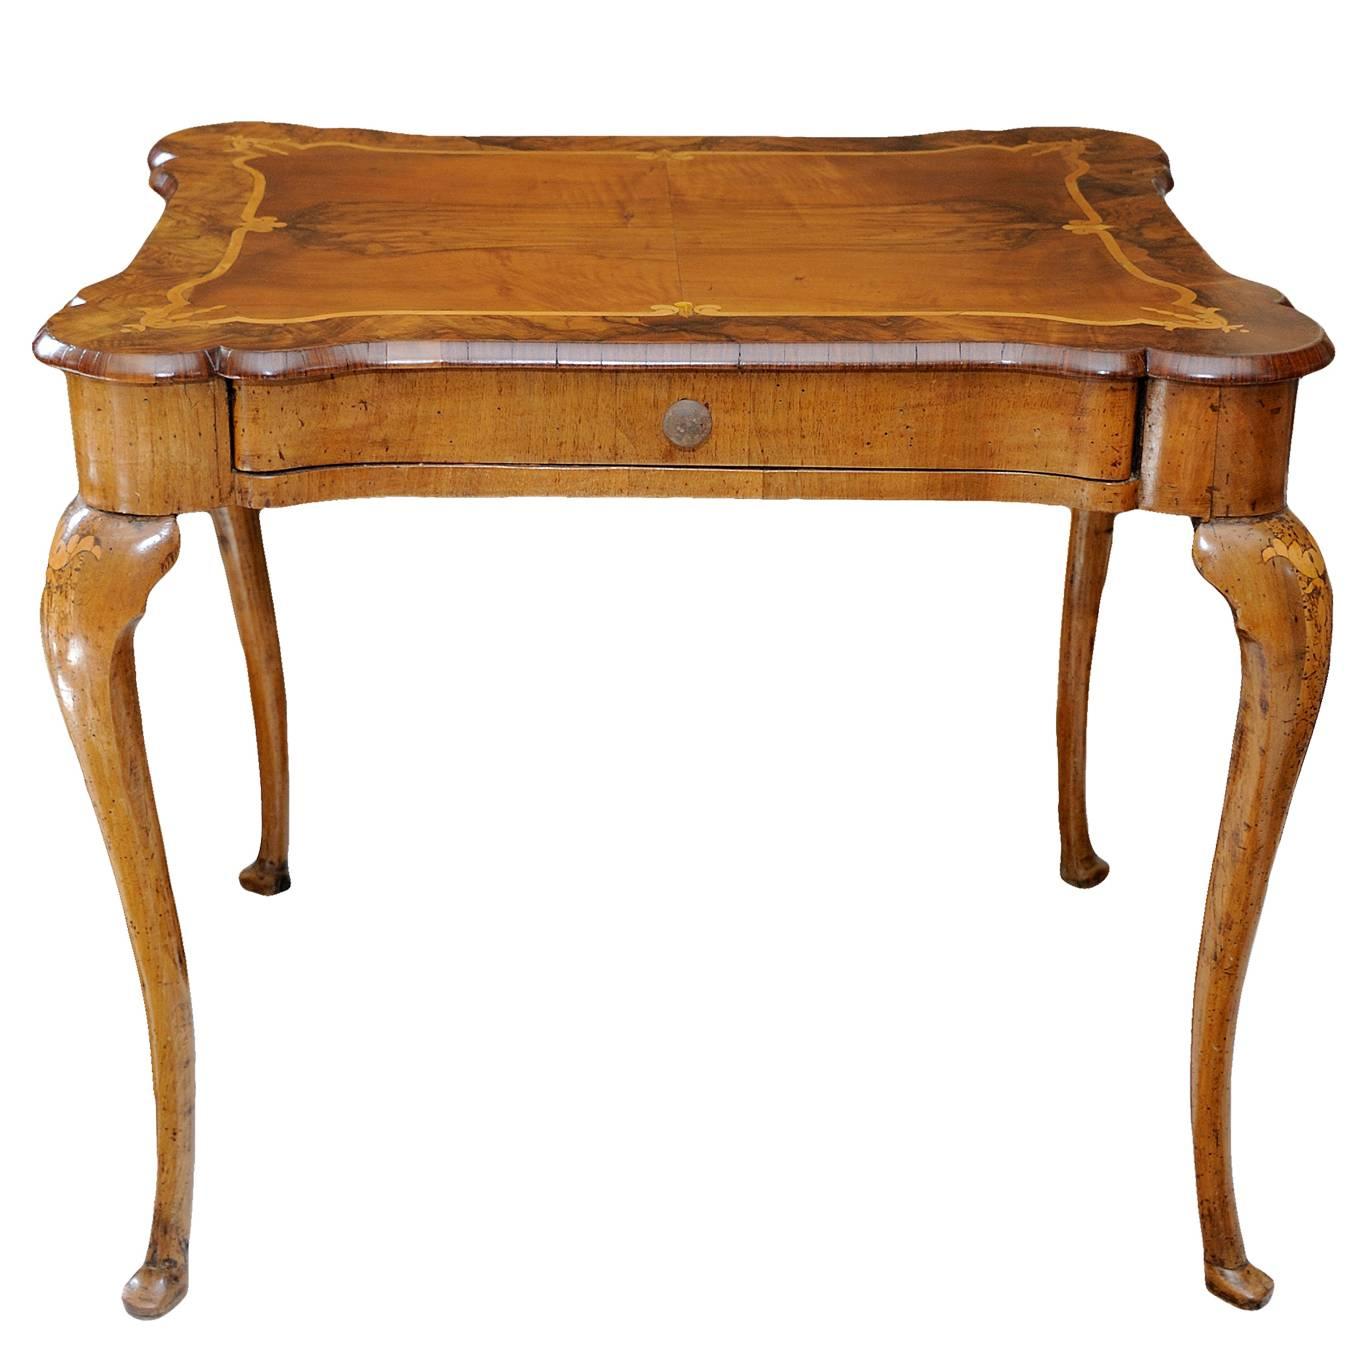 Italian Mid-18th Century Inlayed Cabriole Leg Centre or Side Table, circa 1760 For Sale